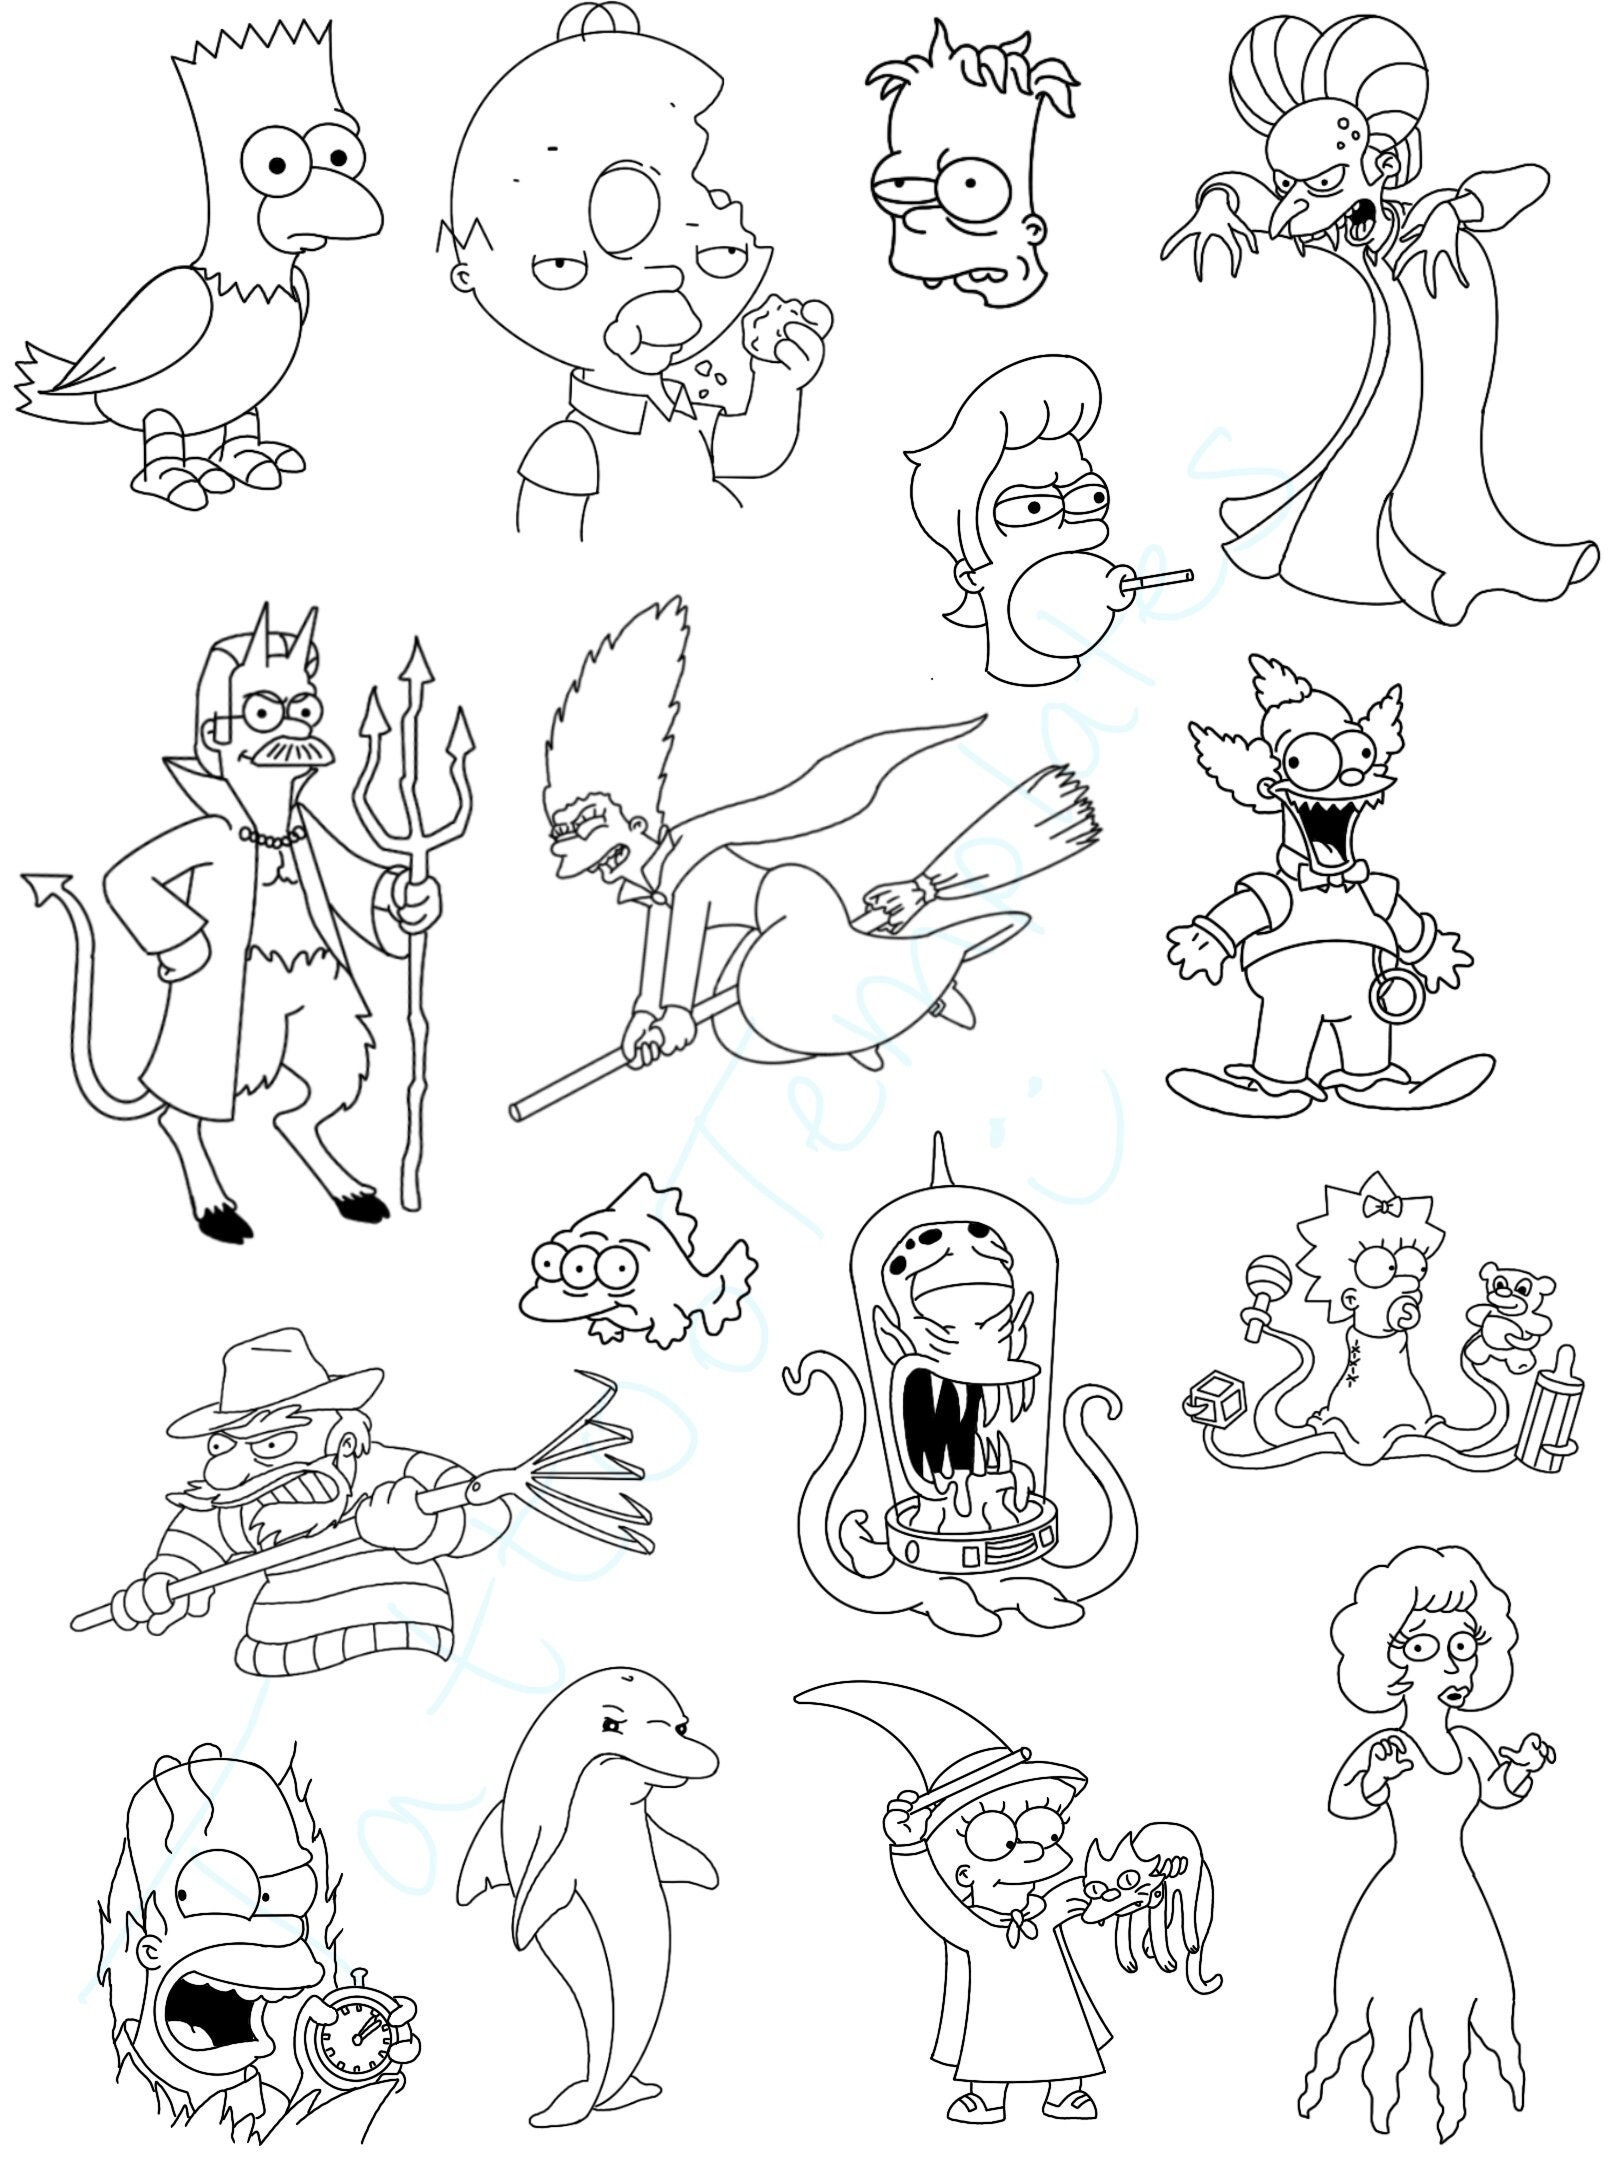 The Simpsons Treehouse of Horror Tattoo Flash Sheet - Etsy